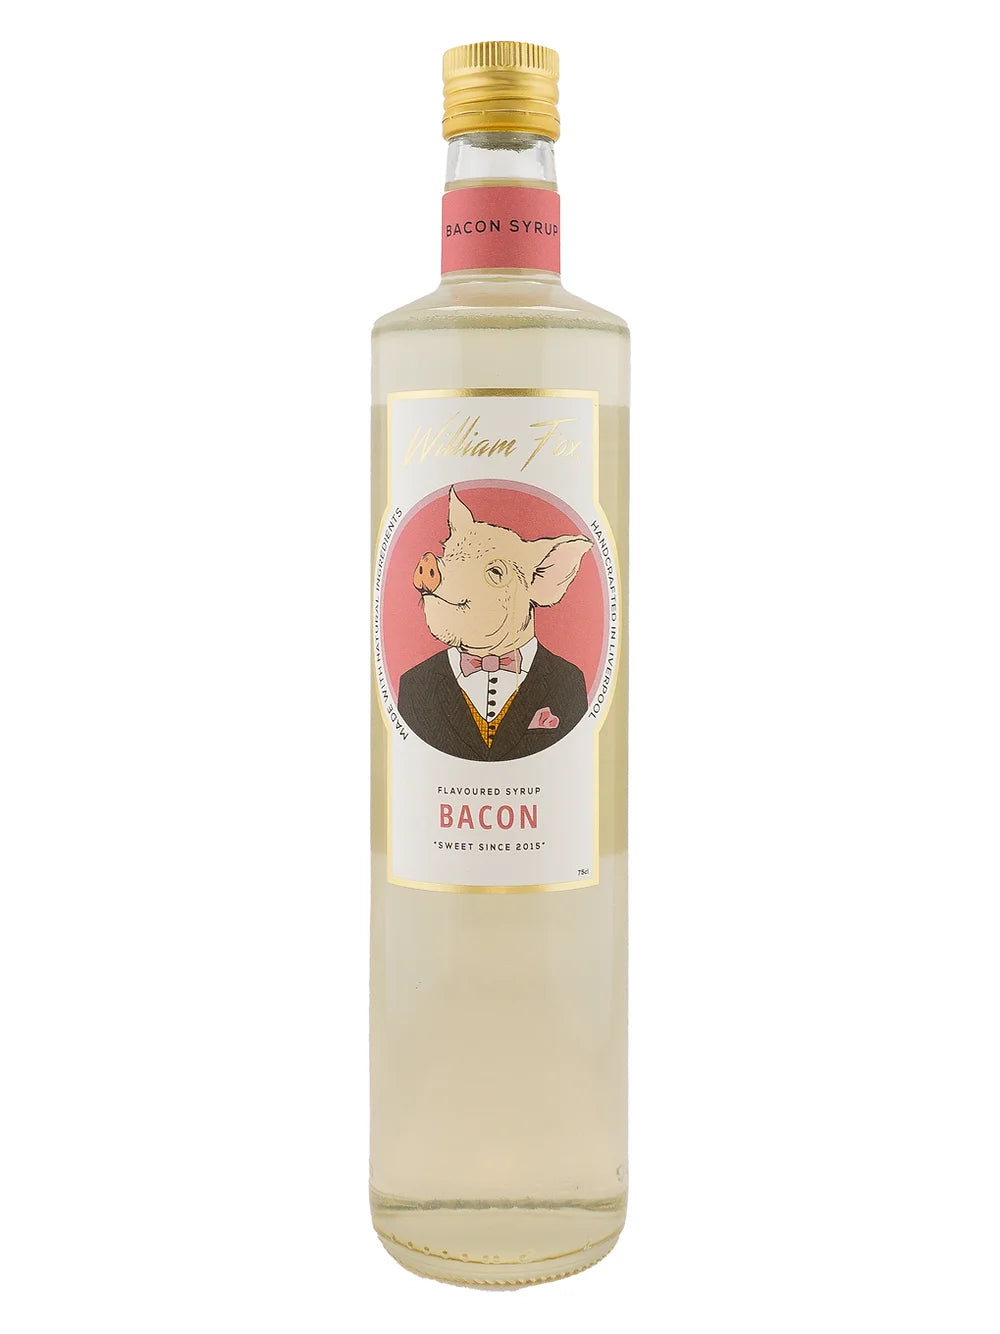 Bacon Flavoured Syrup